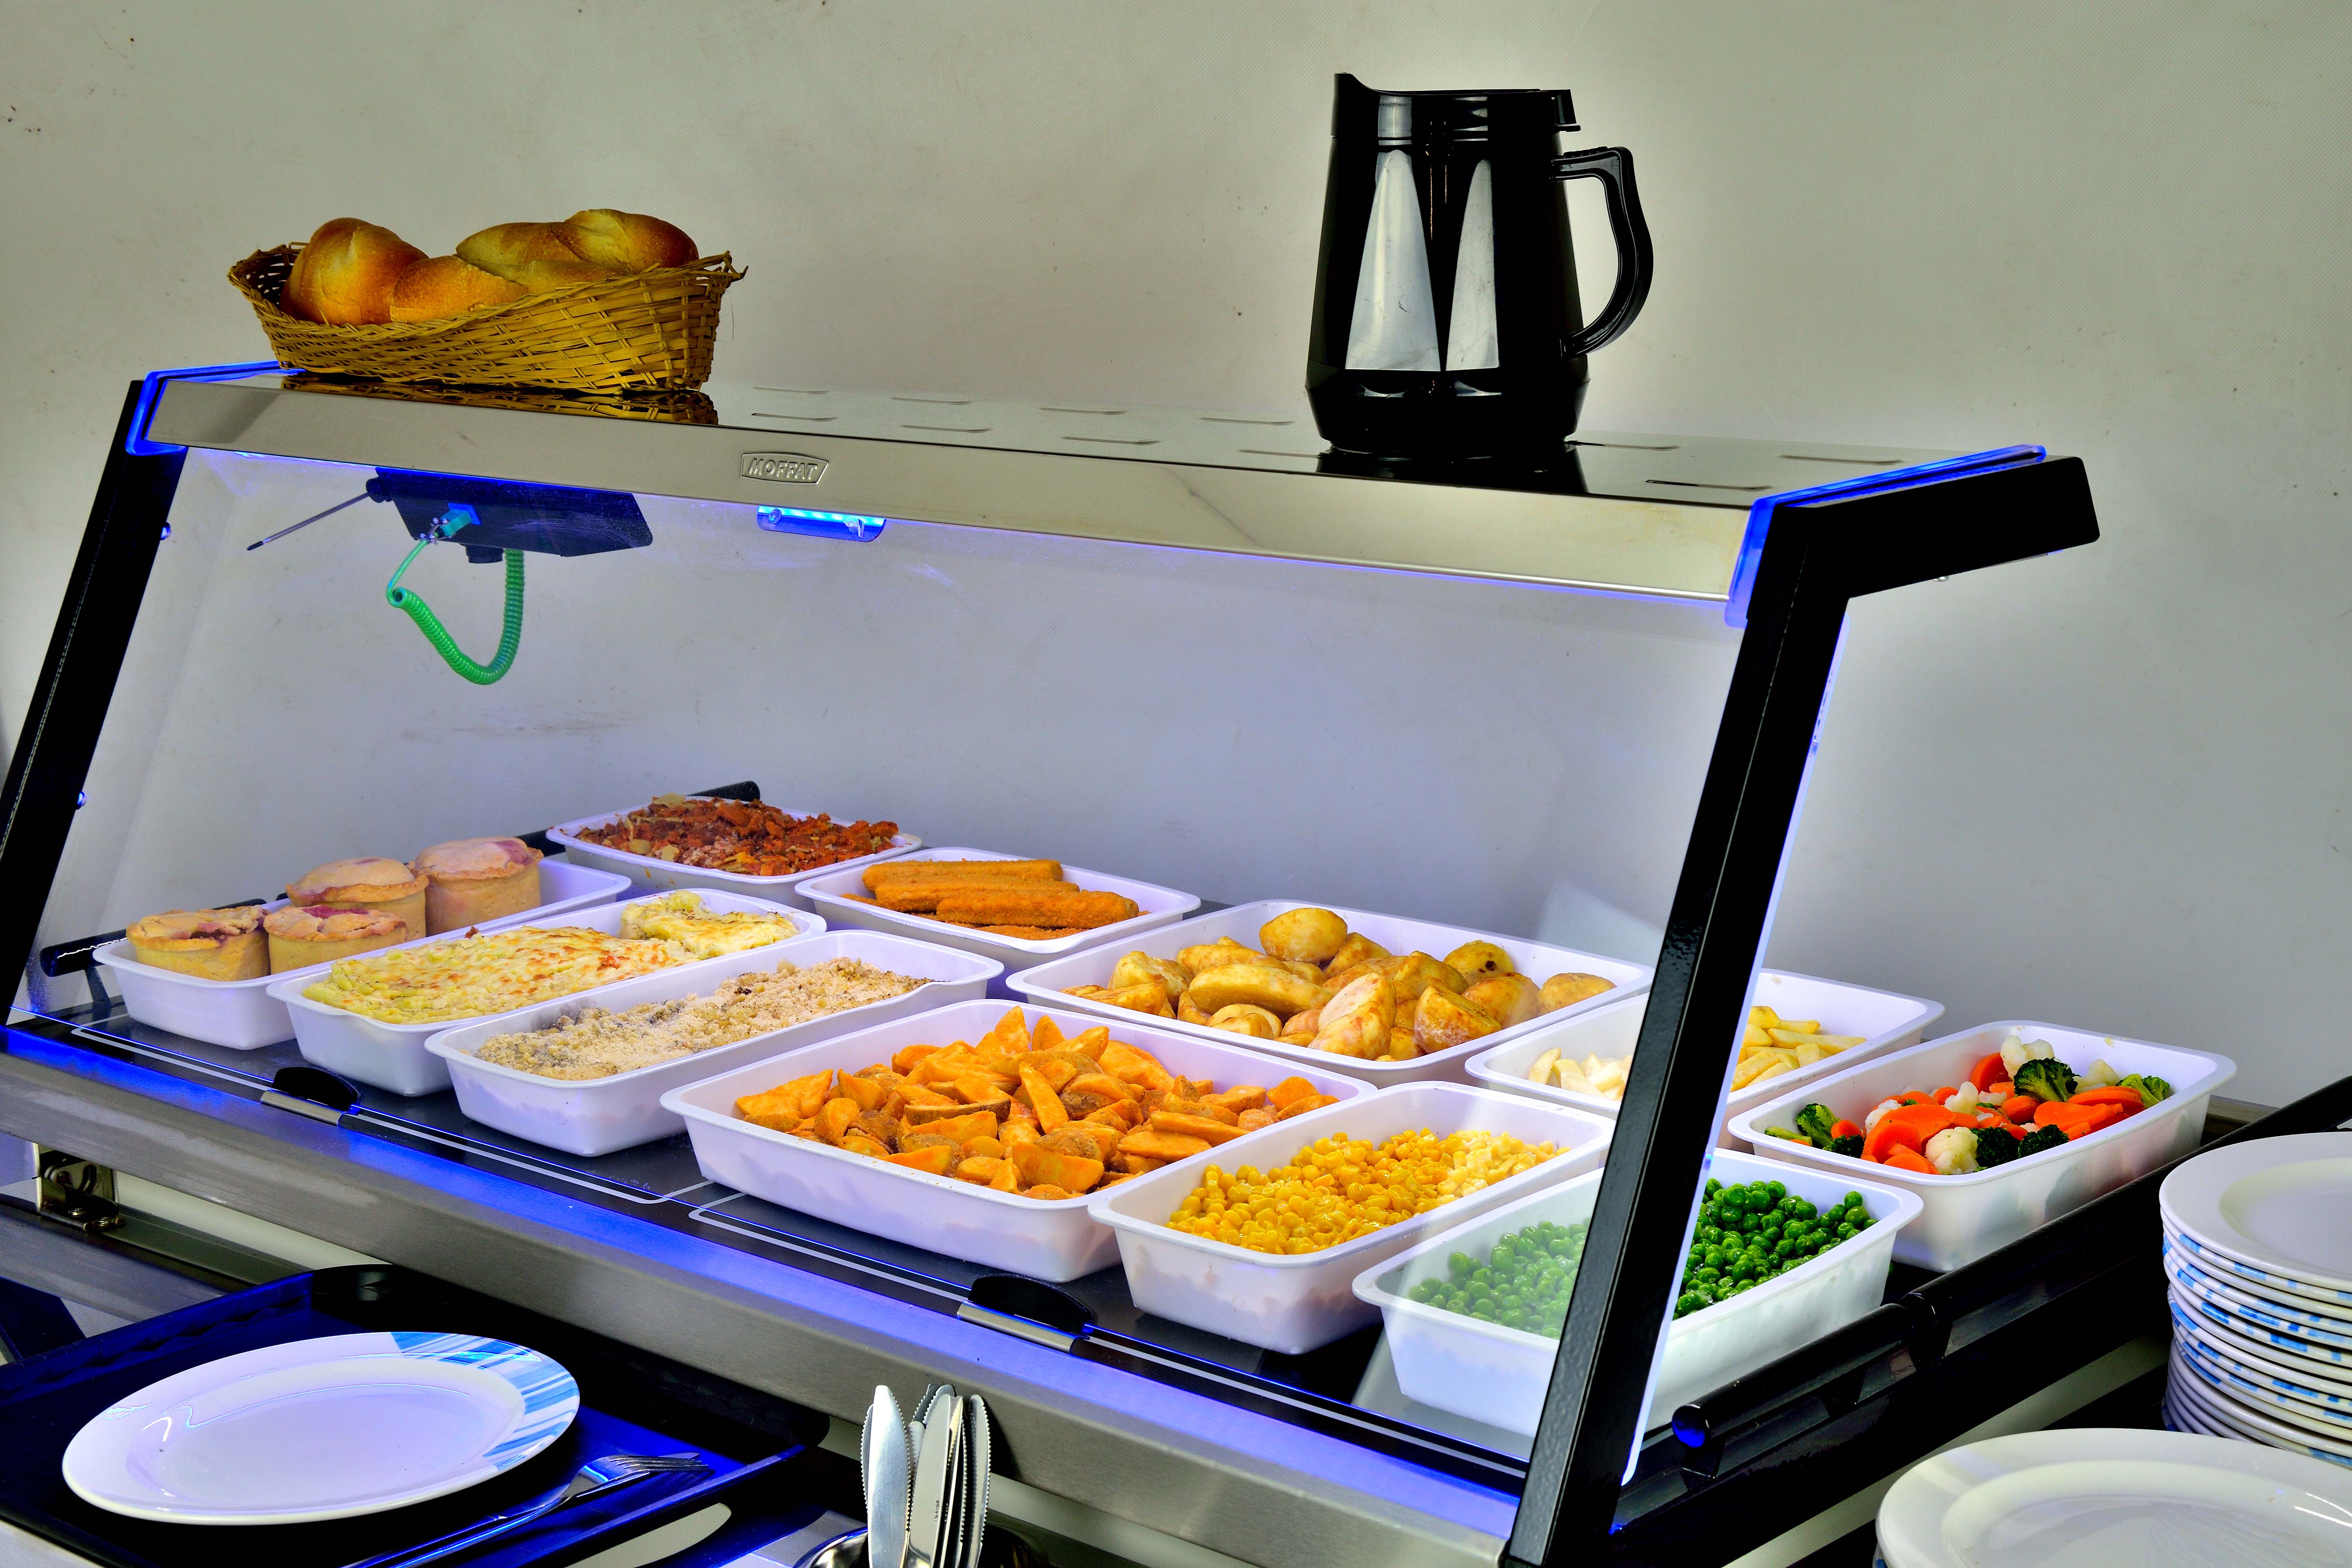 Mobile foodservice solutions: